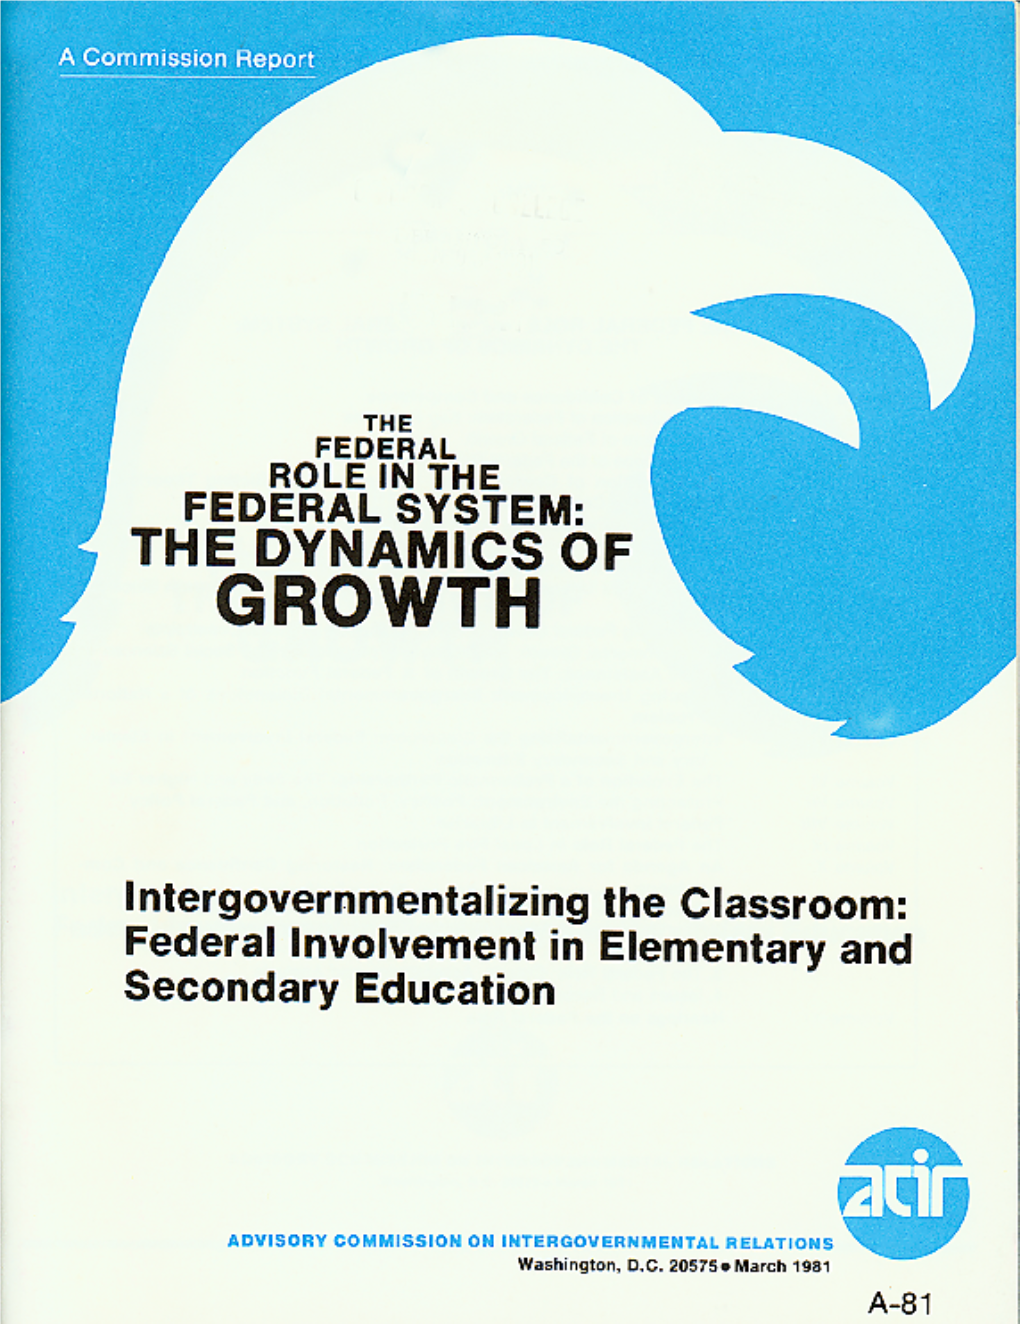 The Federal Role in the Federal System: the Dynamics of Growth